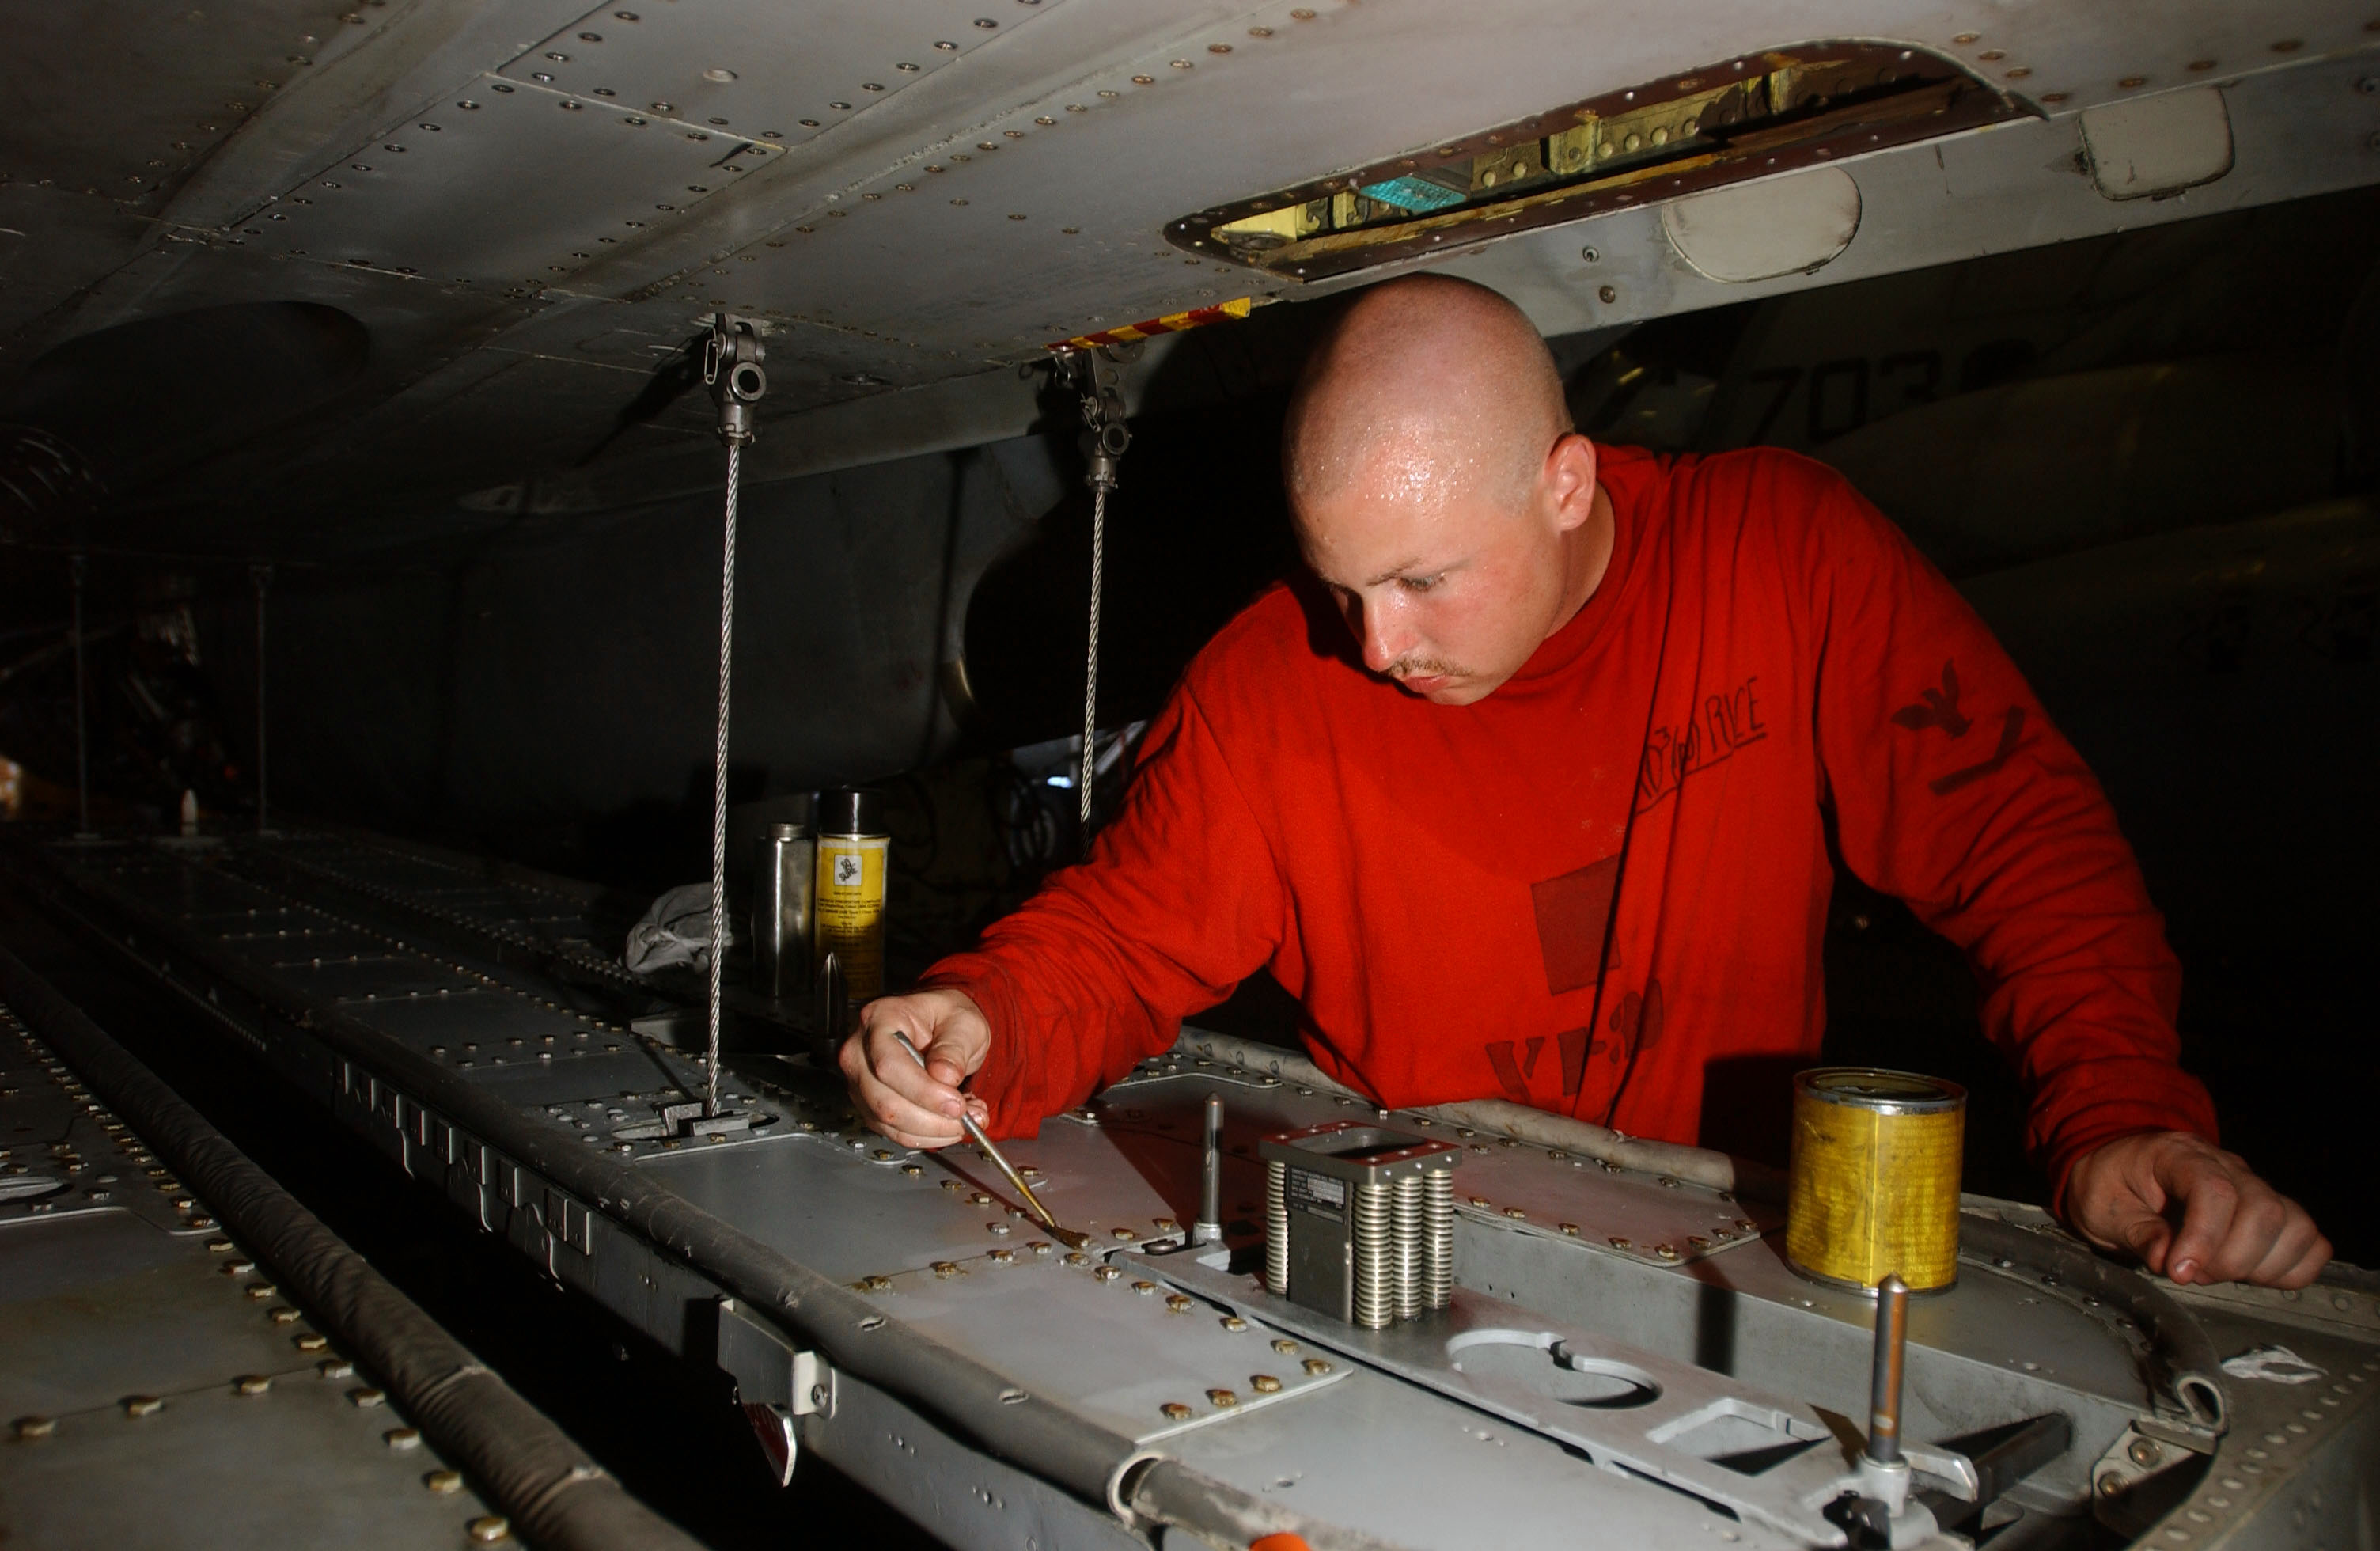 US Navy 040804-N-1573O-016 Aviation Ordnanceman 3rd Class Christopher Rice of Lexington, N.C., applies a corrosion prevention compound to the weapon rails of an F-14D Tomcat